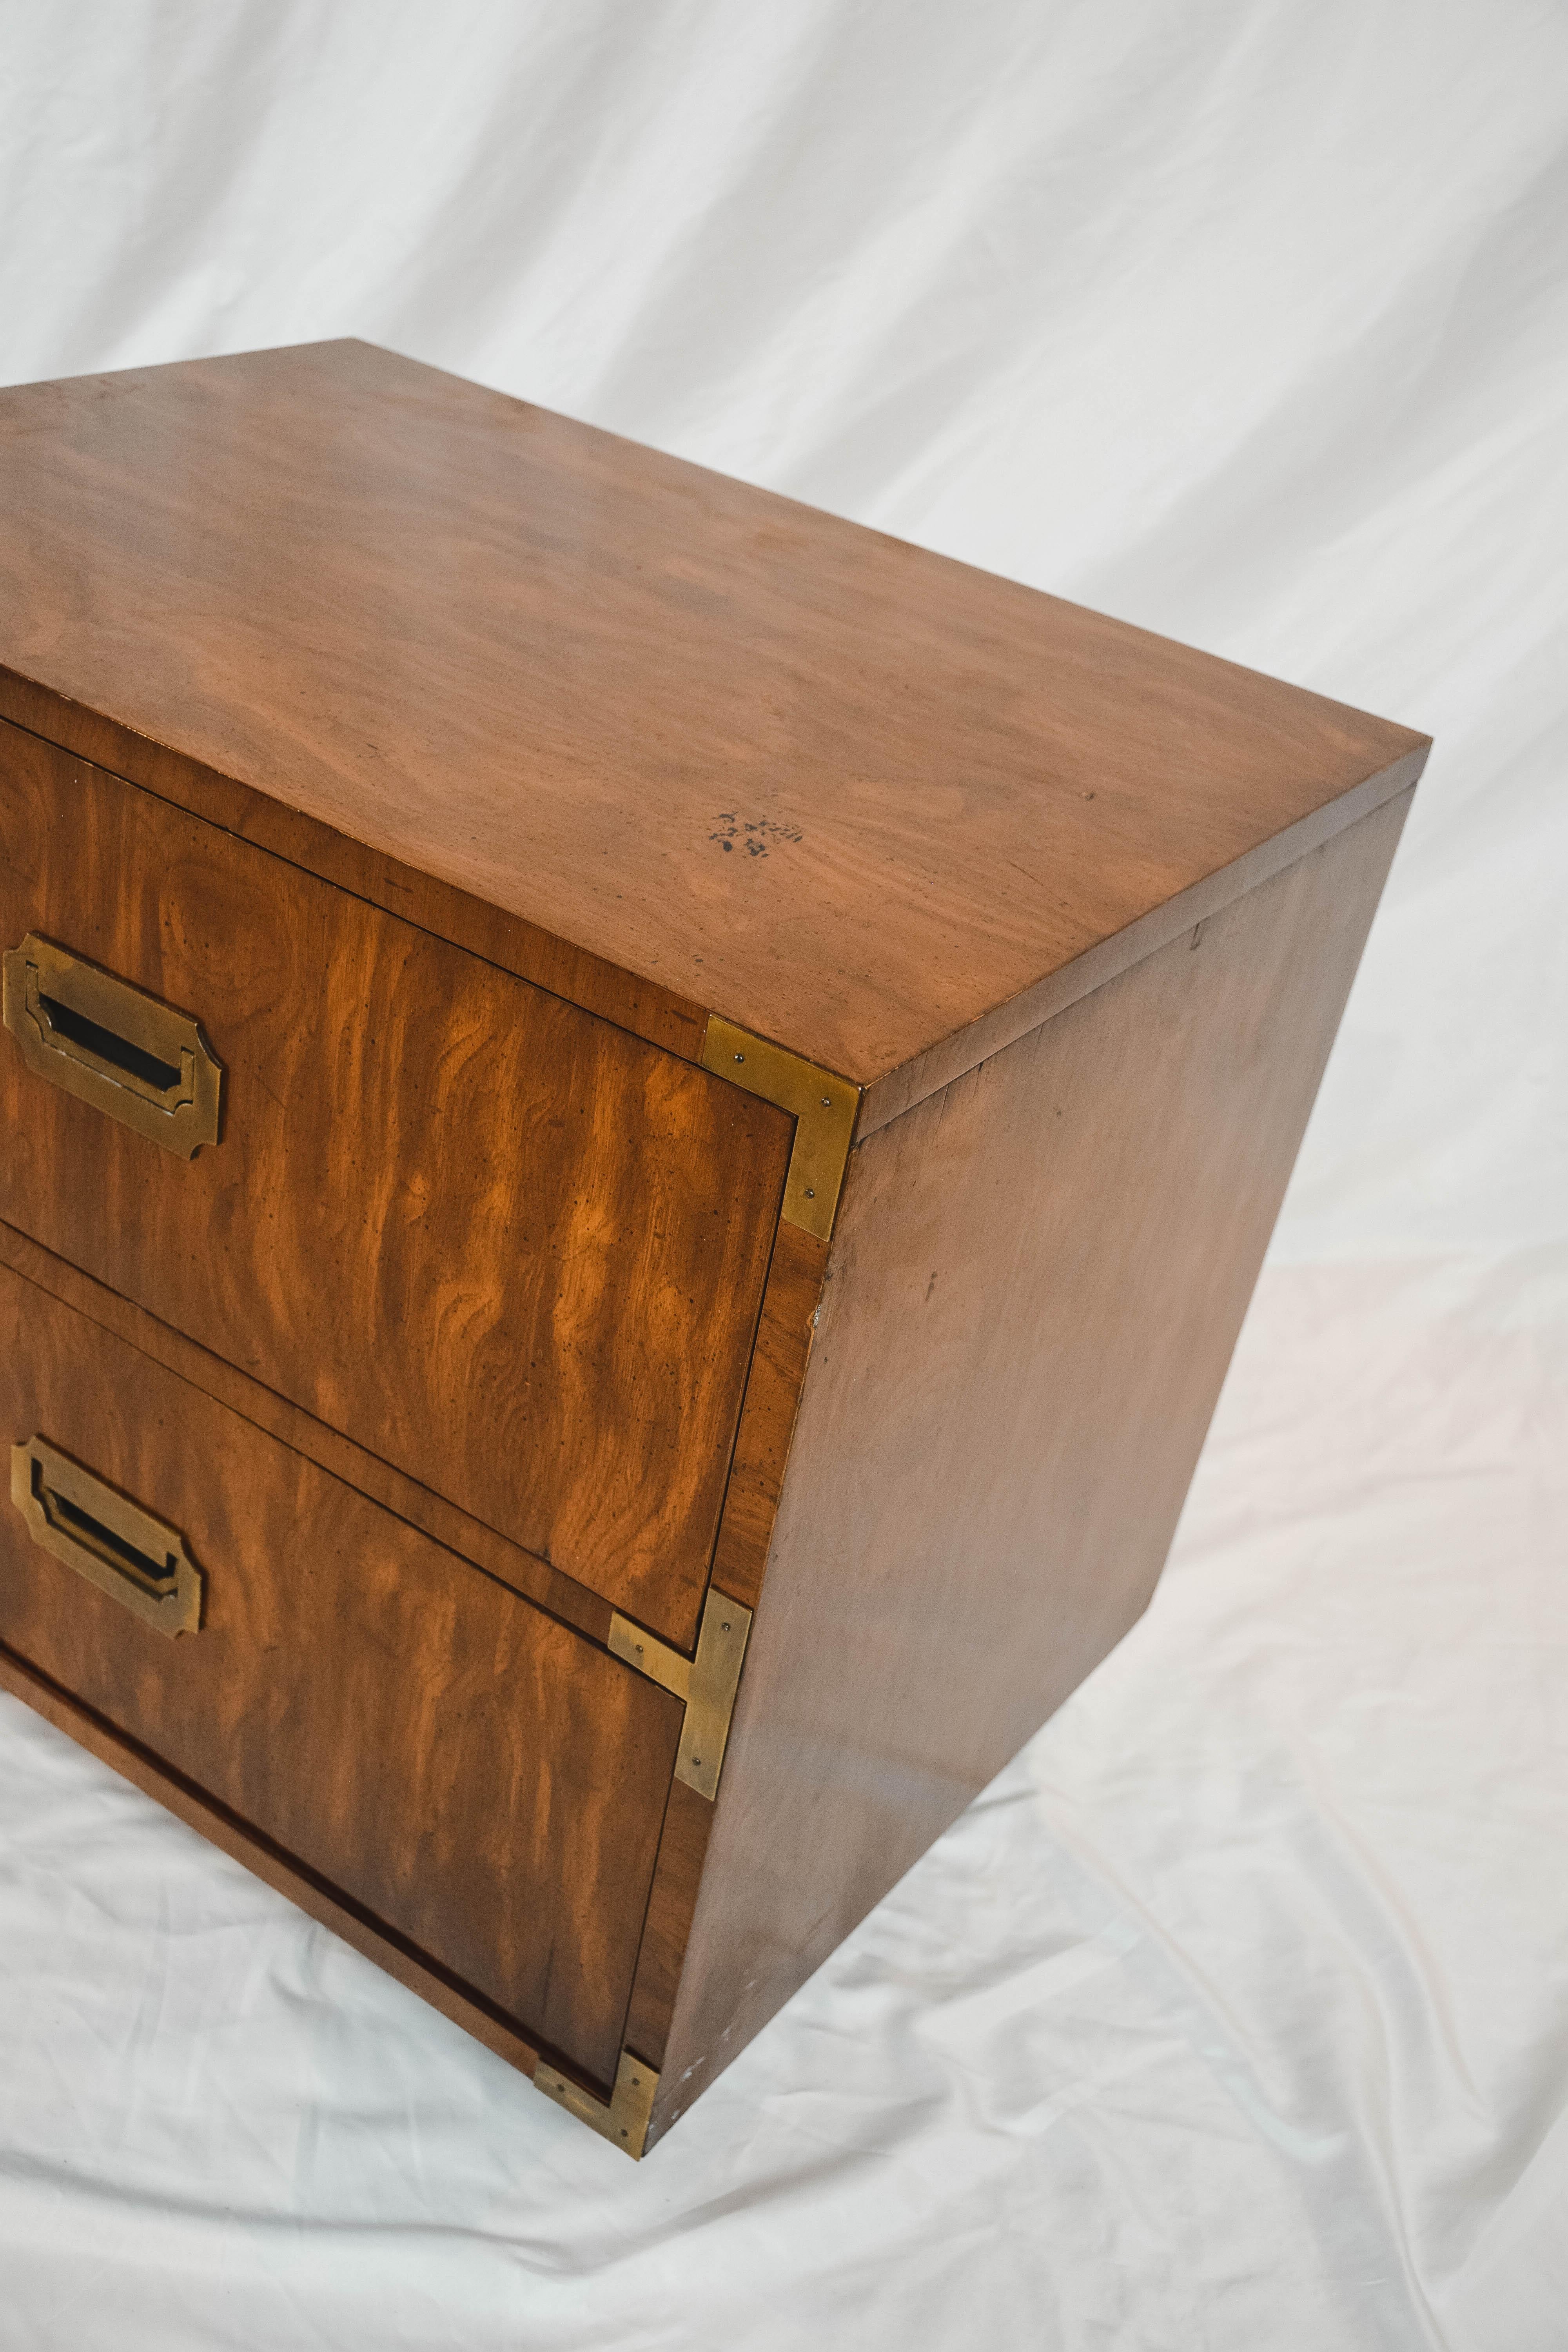 A pair of Campaign style end tables by Dixie Furniture, mid-20th century. This pair of end tables feature a rectangular top and conforming case with two stacked drawers featuring brass hardware. Each piece is hallmarked Dixie Campaigner inside the